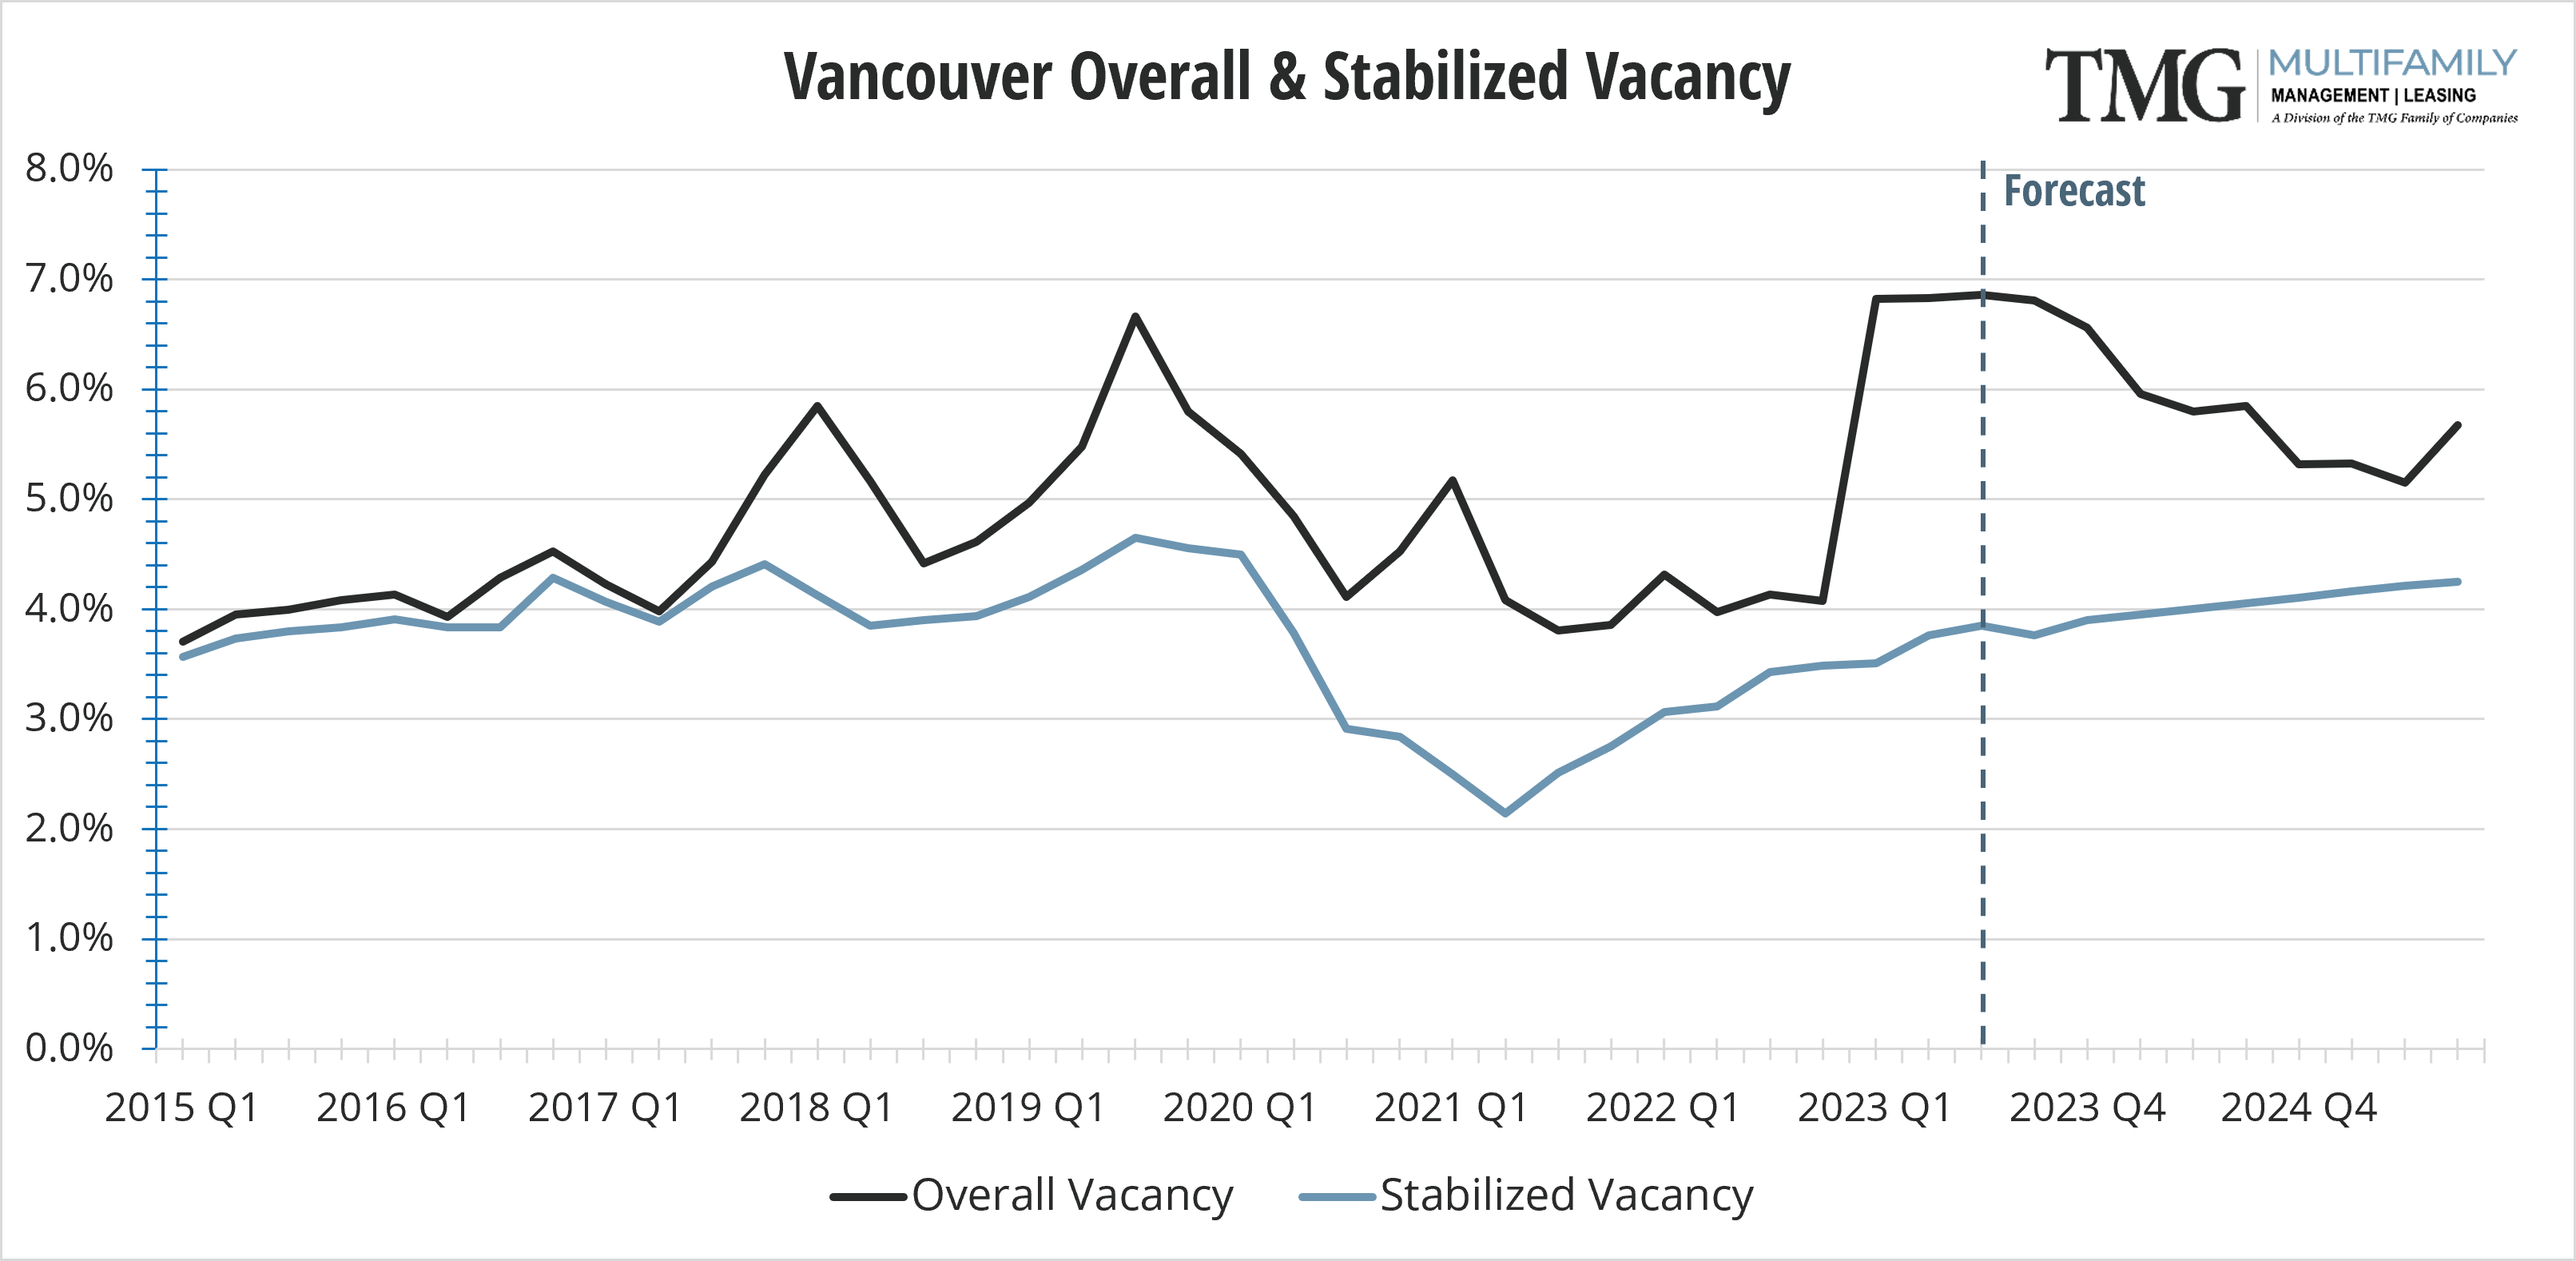 VAN Overall and Stabilized Vacancy